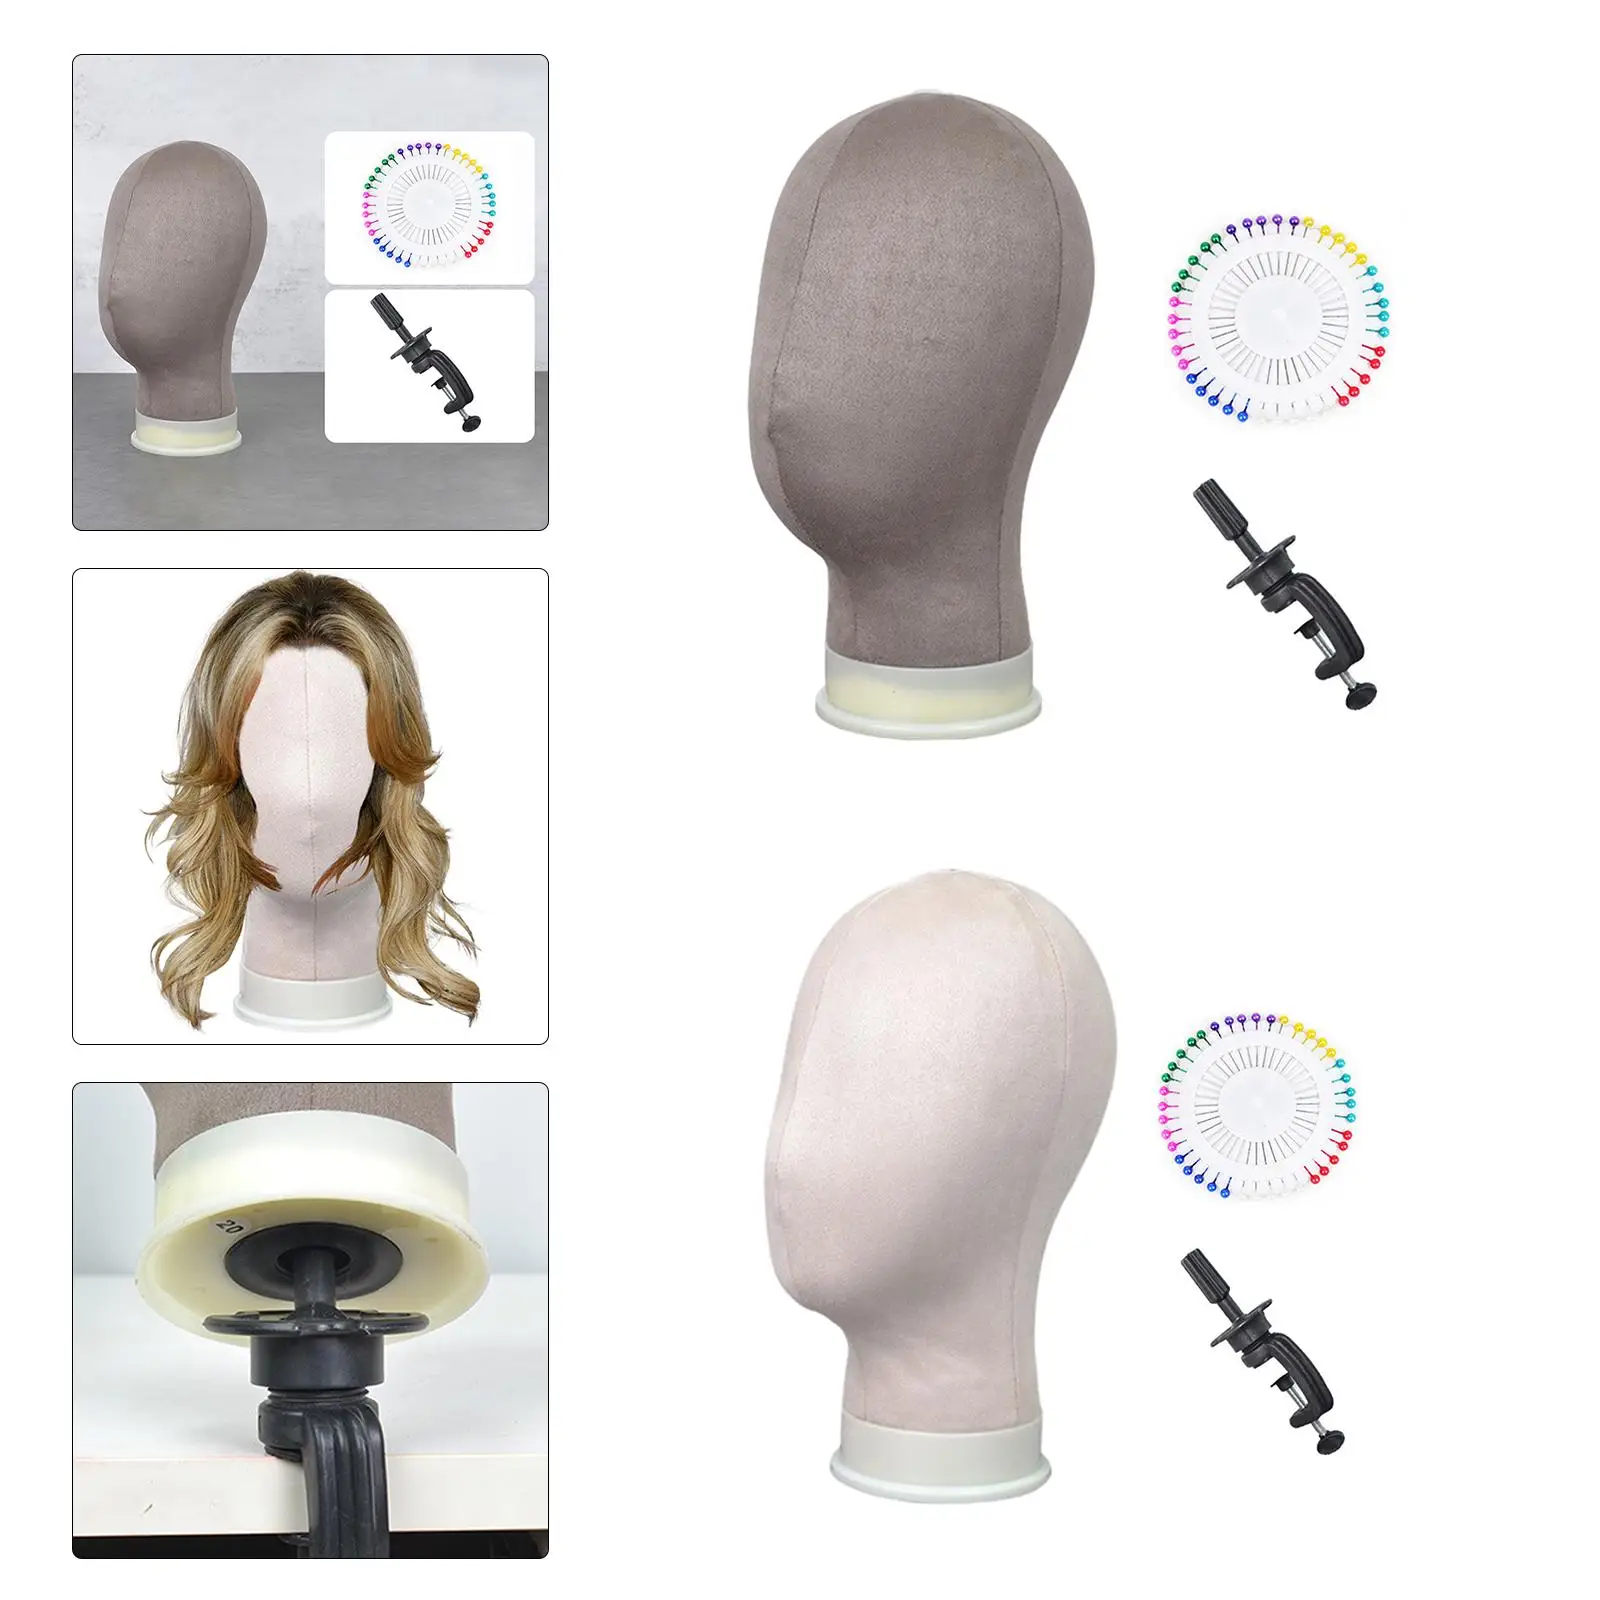 Professional Wig Head with Table Clamp Stand Salon Use Display Mannequin Head for Glasses Caps Making Wig Drying Styling